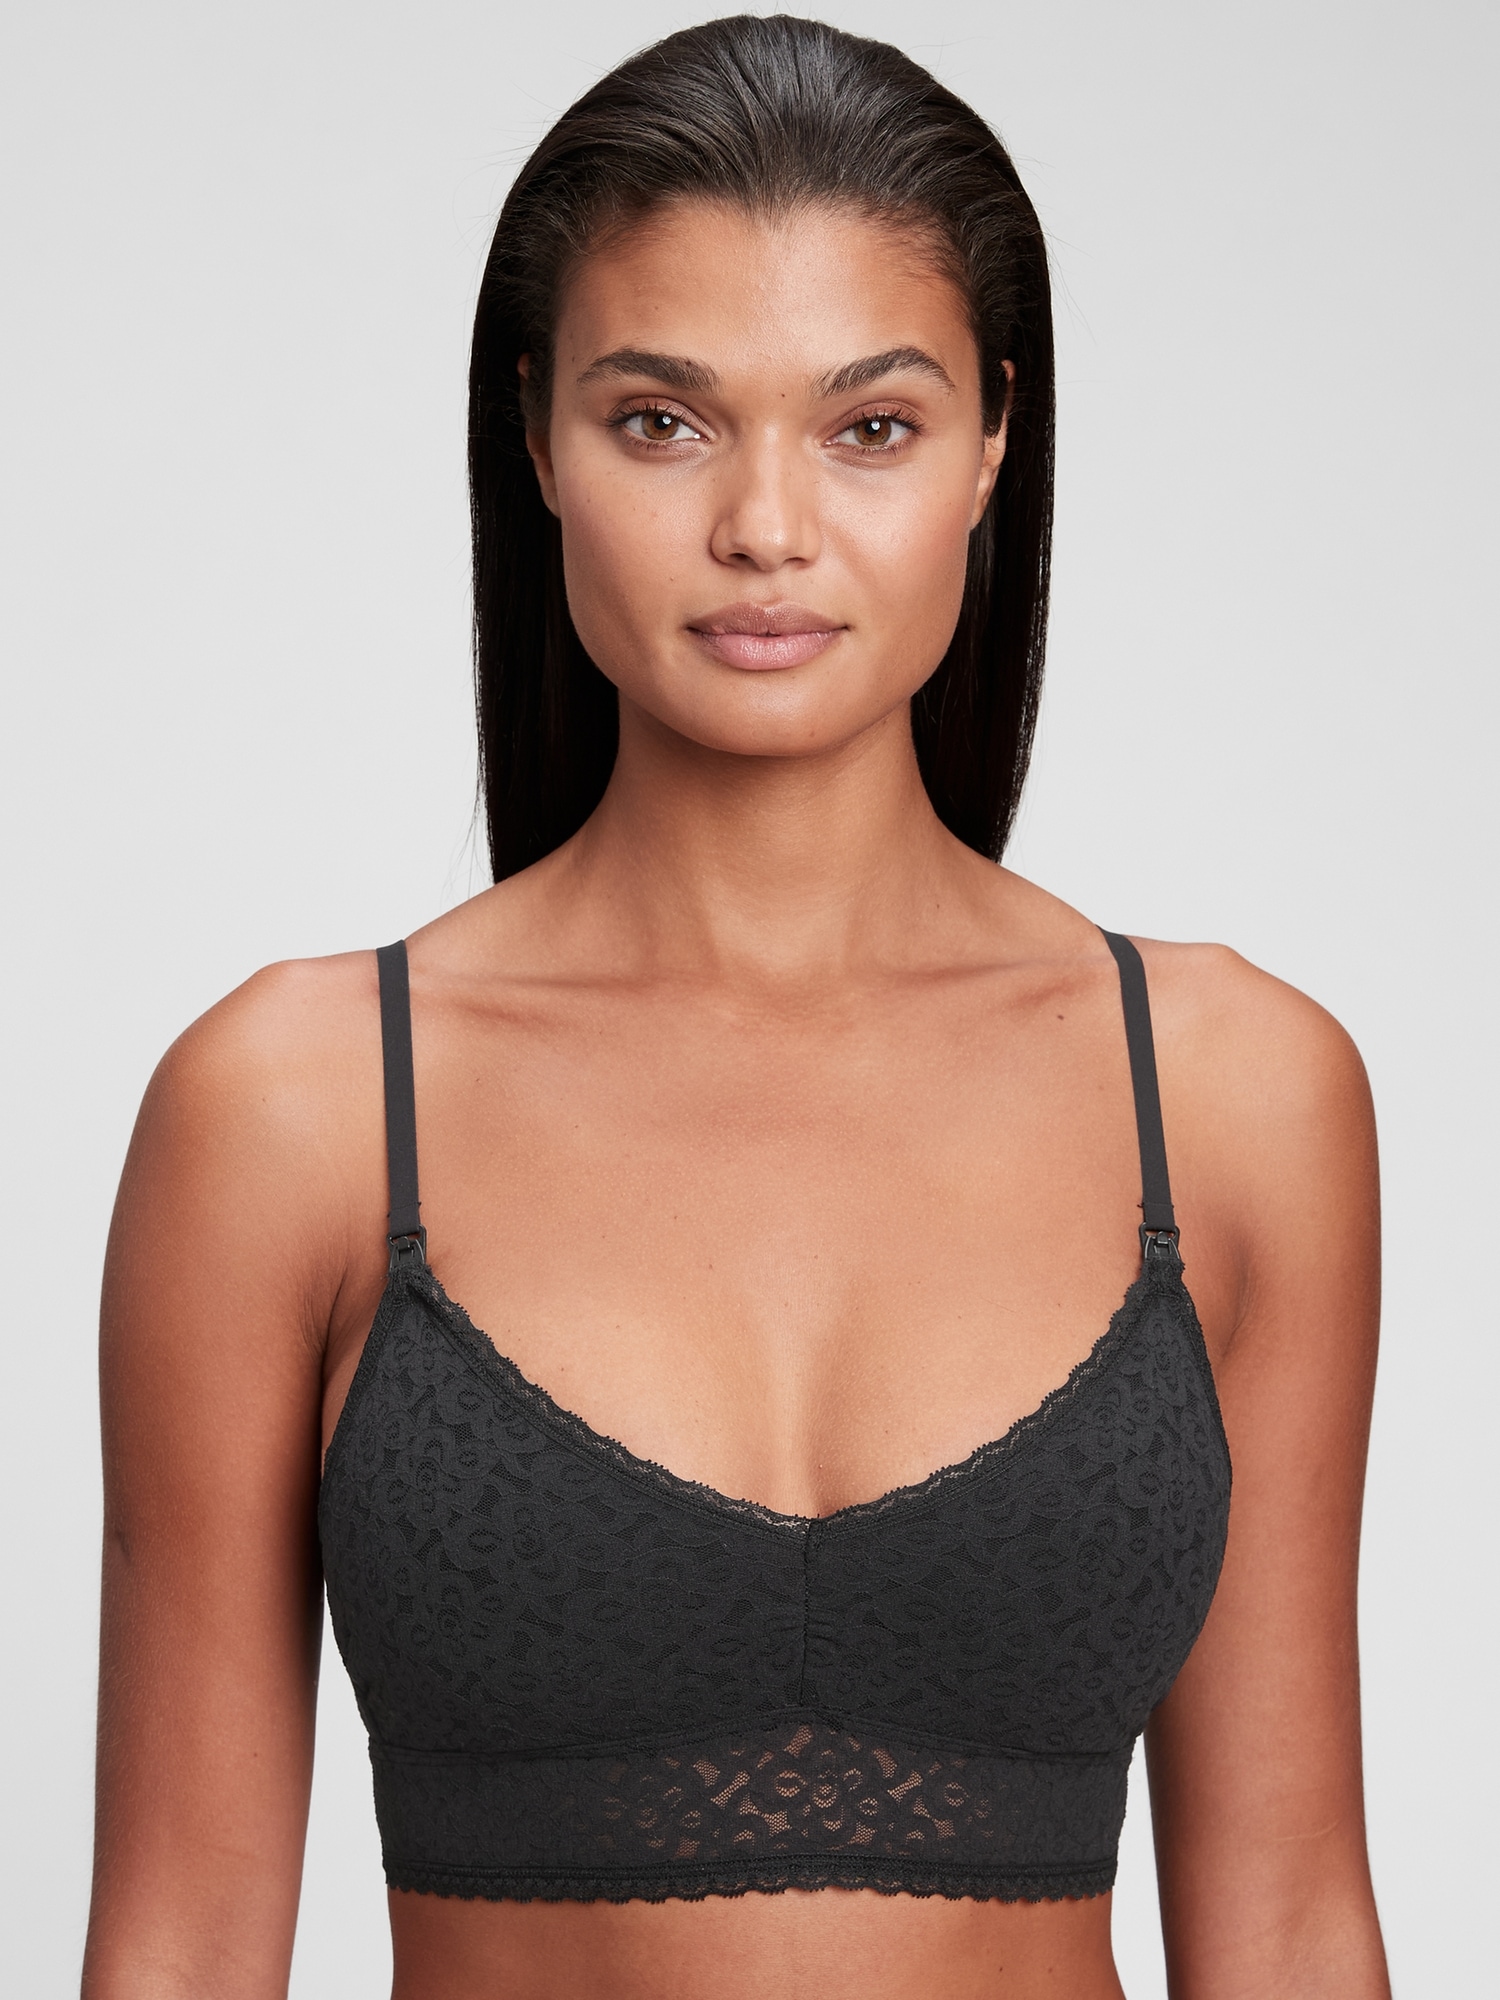 Shop Gap Lace Bralettes up to 60% Off